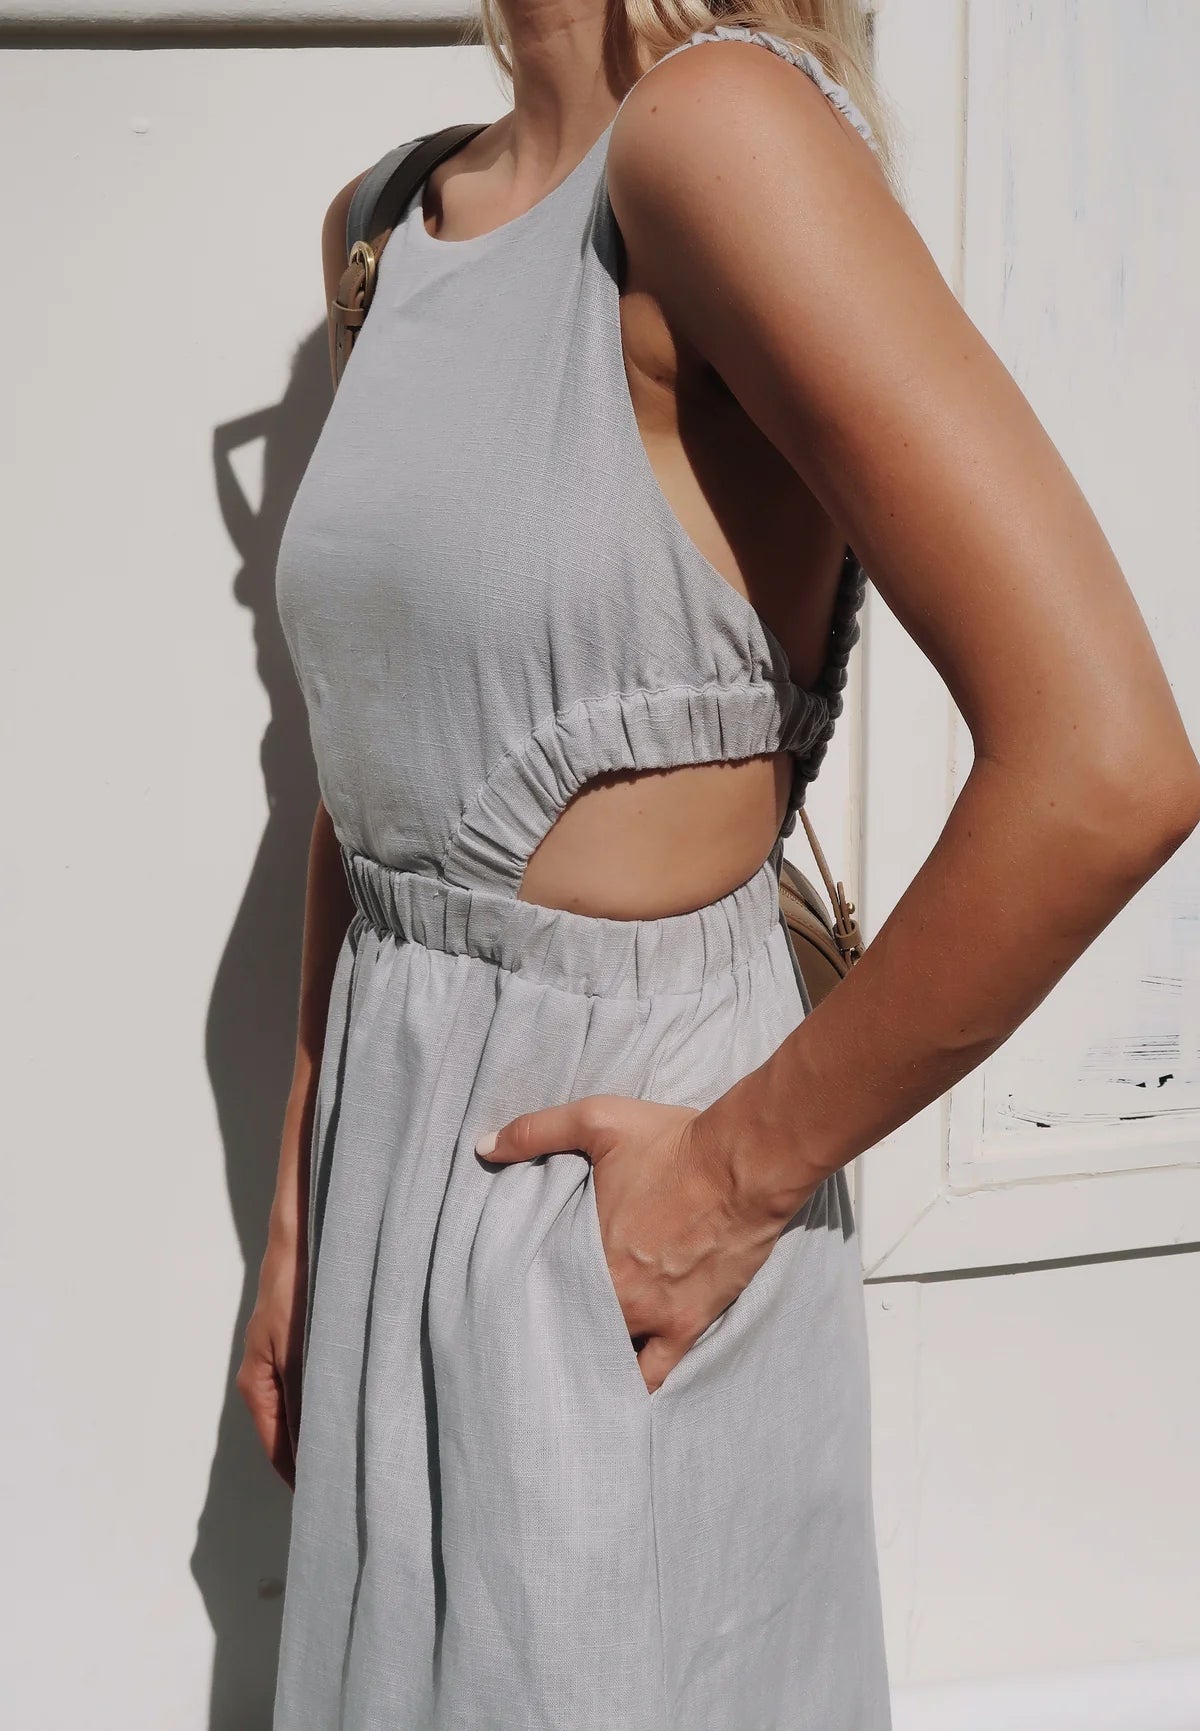 Light grey linen midi dress with high neck and elasticated cut out features with a cross back